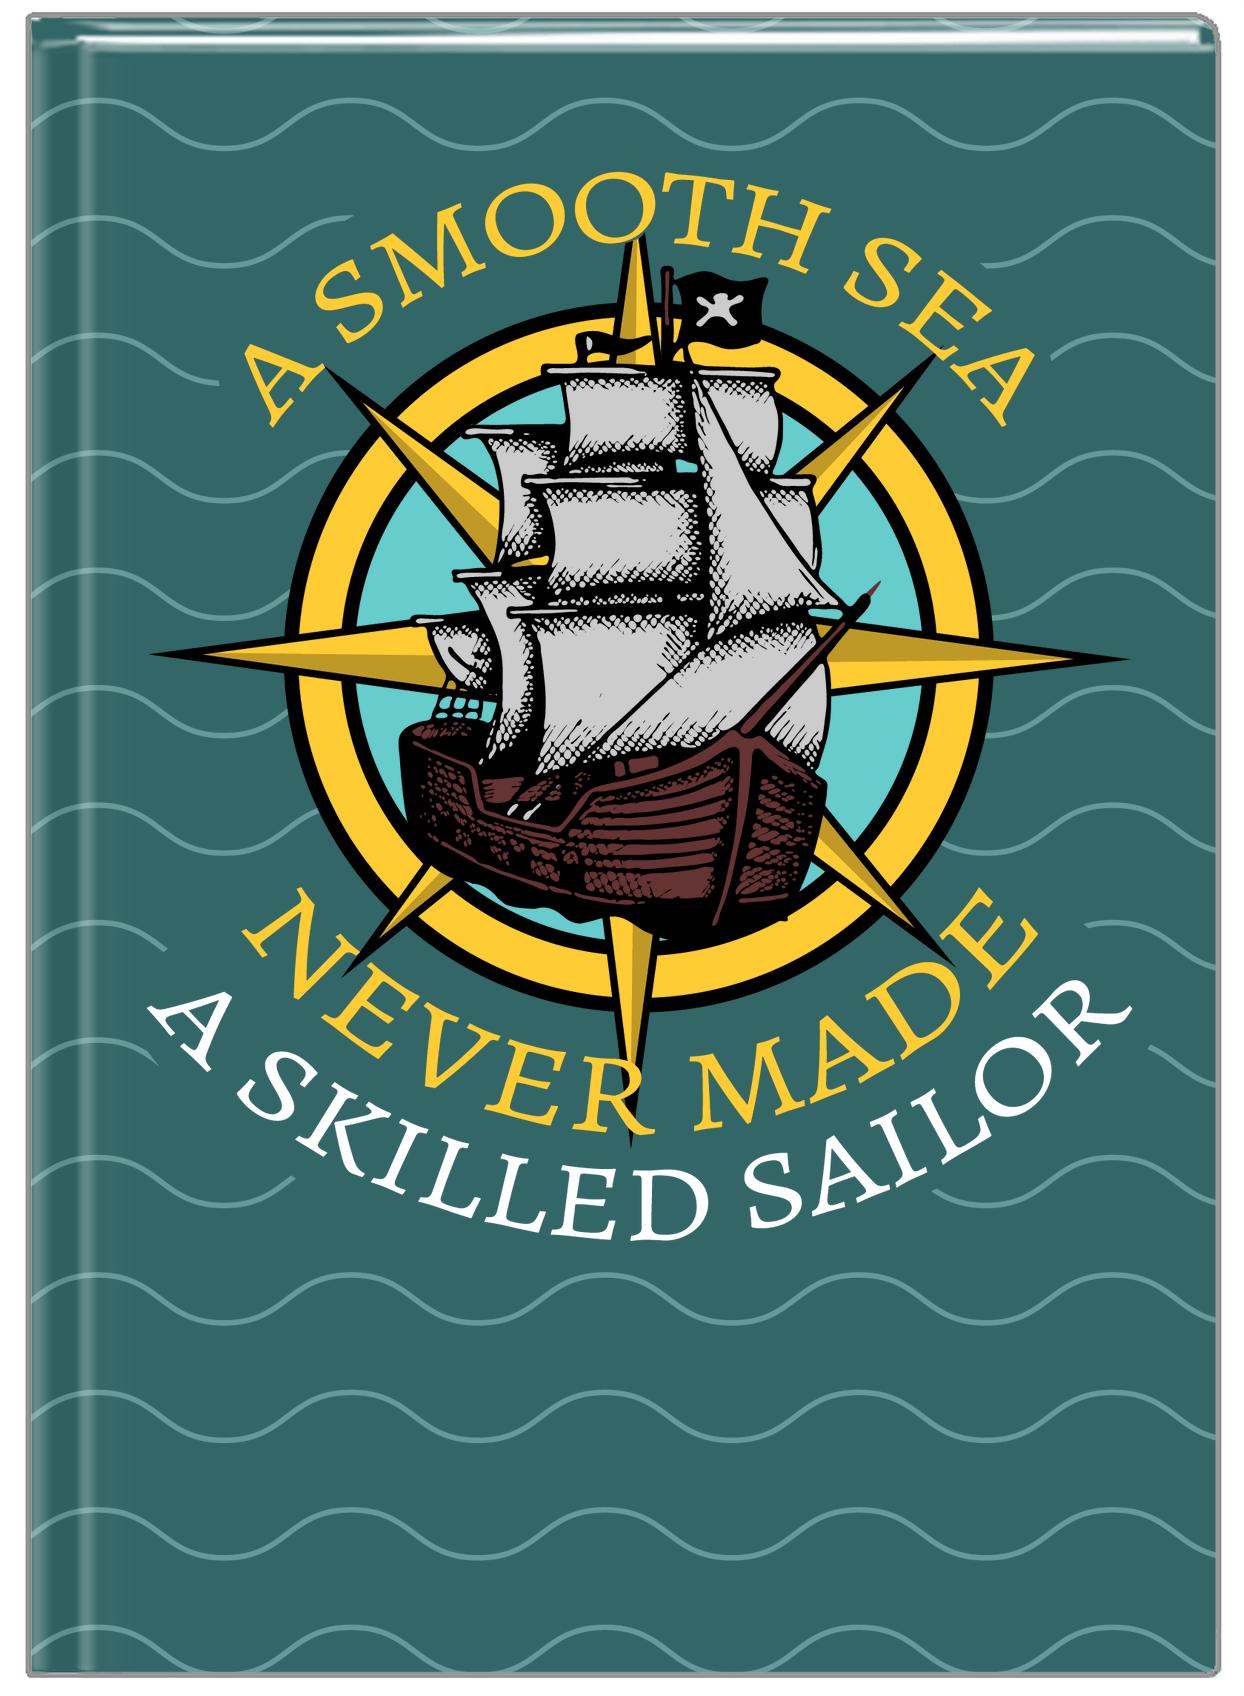 Pirates Journal - A Smooth Sea - Front View